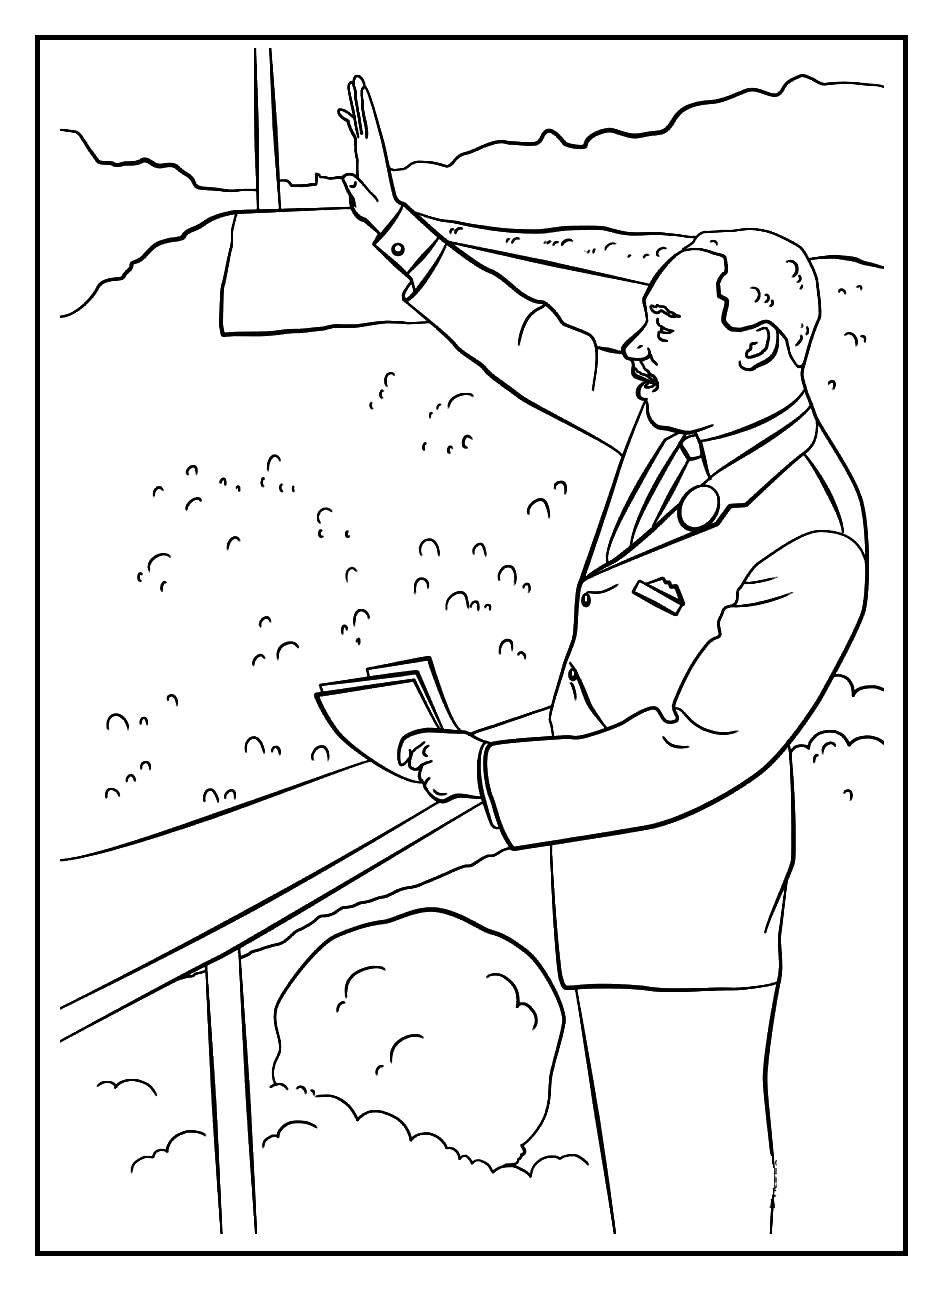 Martin Luther King Jr Image Coloring Pages